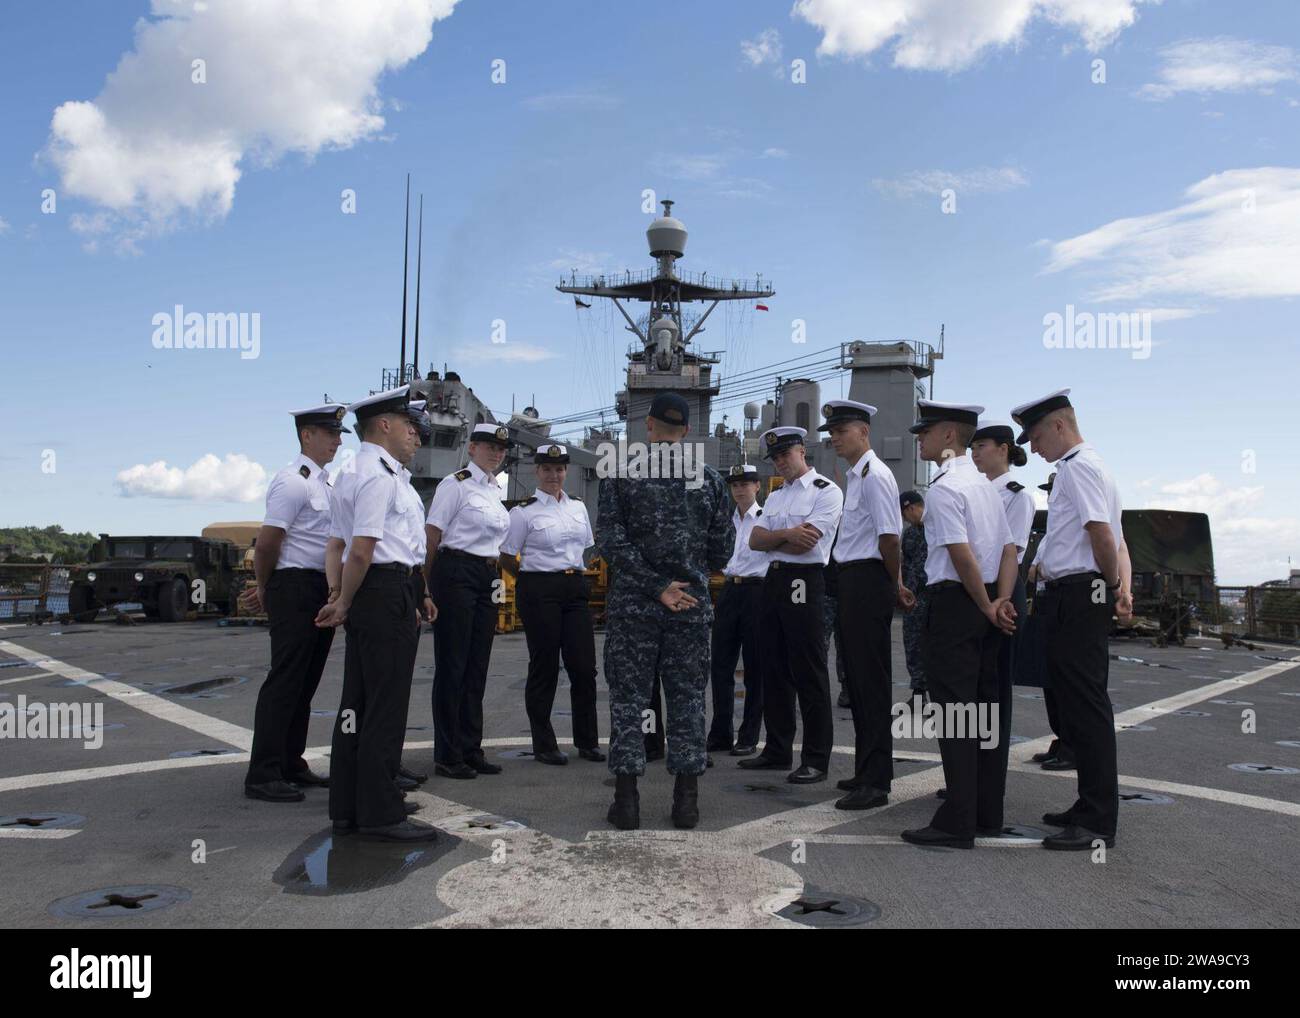 US military forces. 180623TJ319-0190 GDYNIA, Poland (June 23, 2018 ...